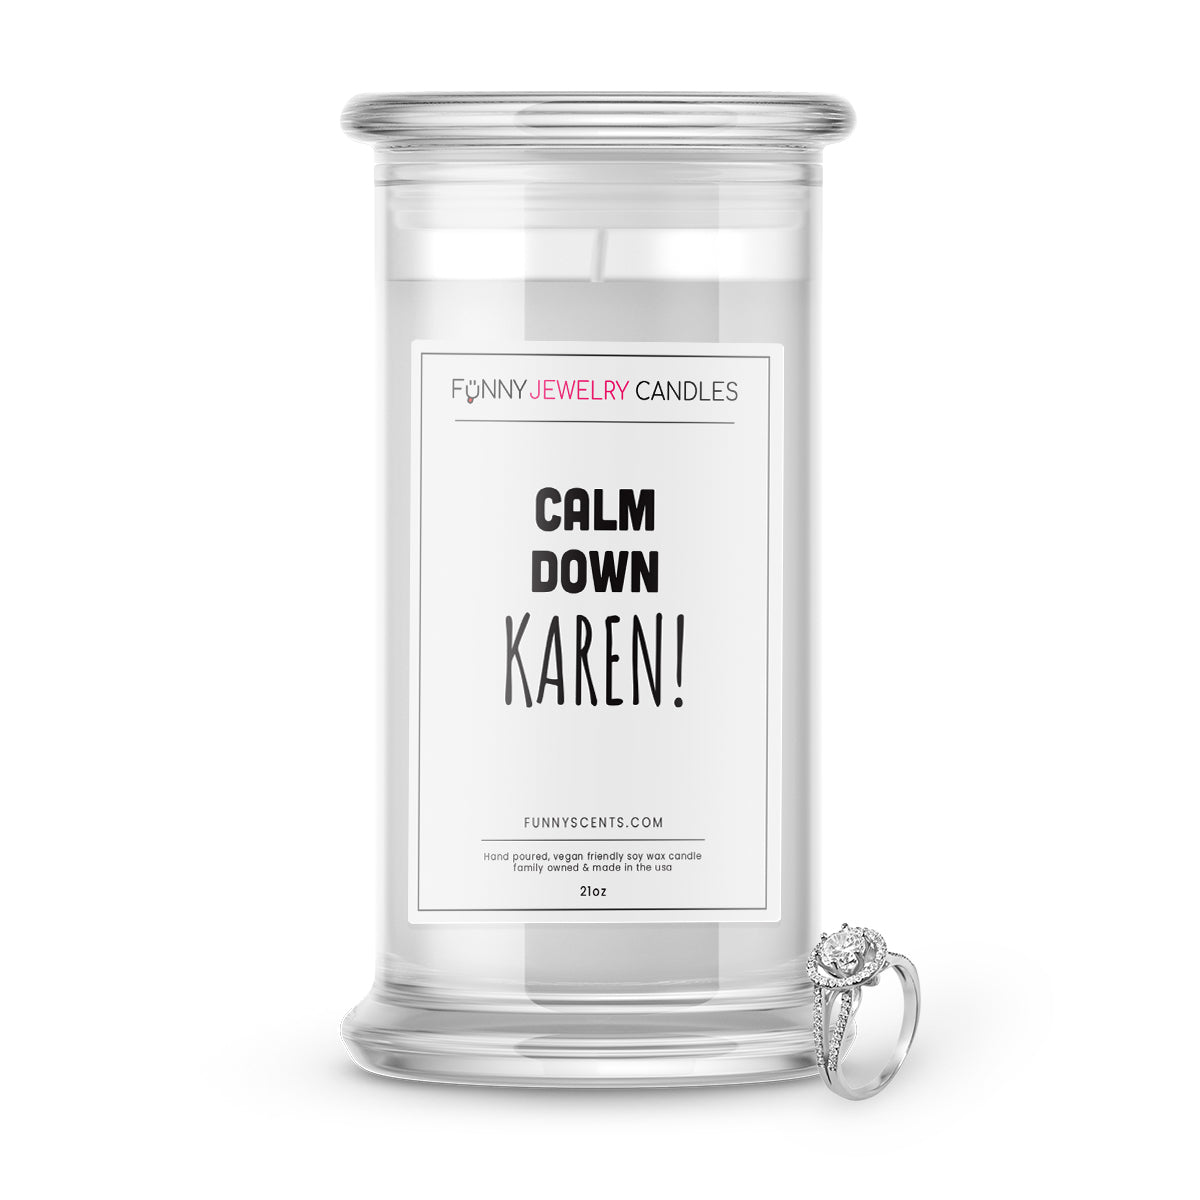 Calm Down Karen! Jewelry Funny Candles